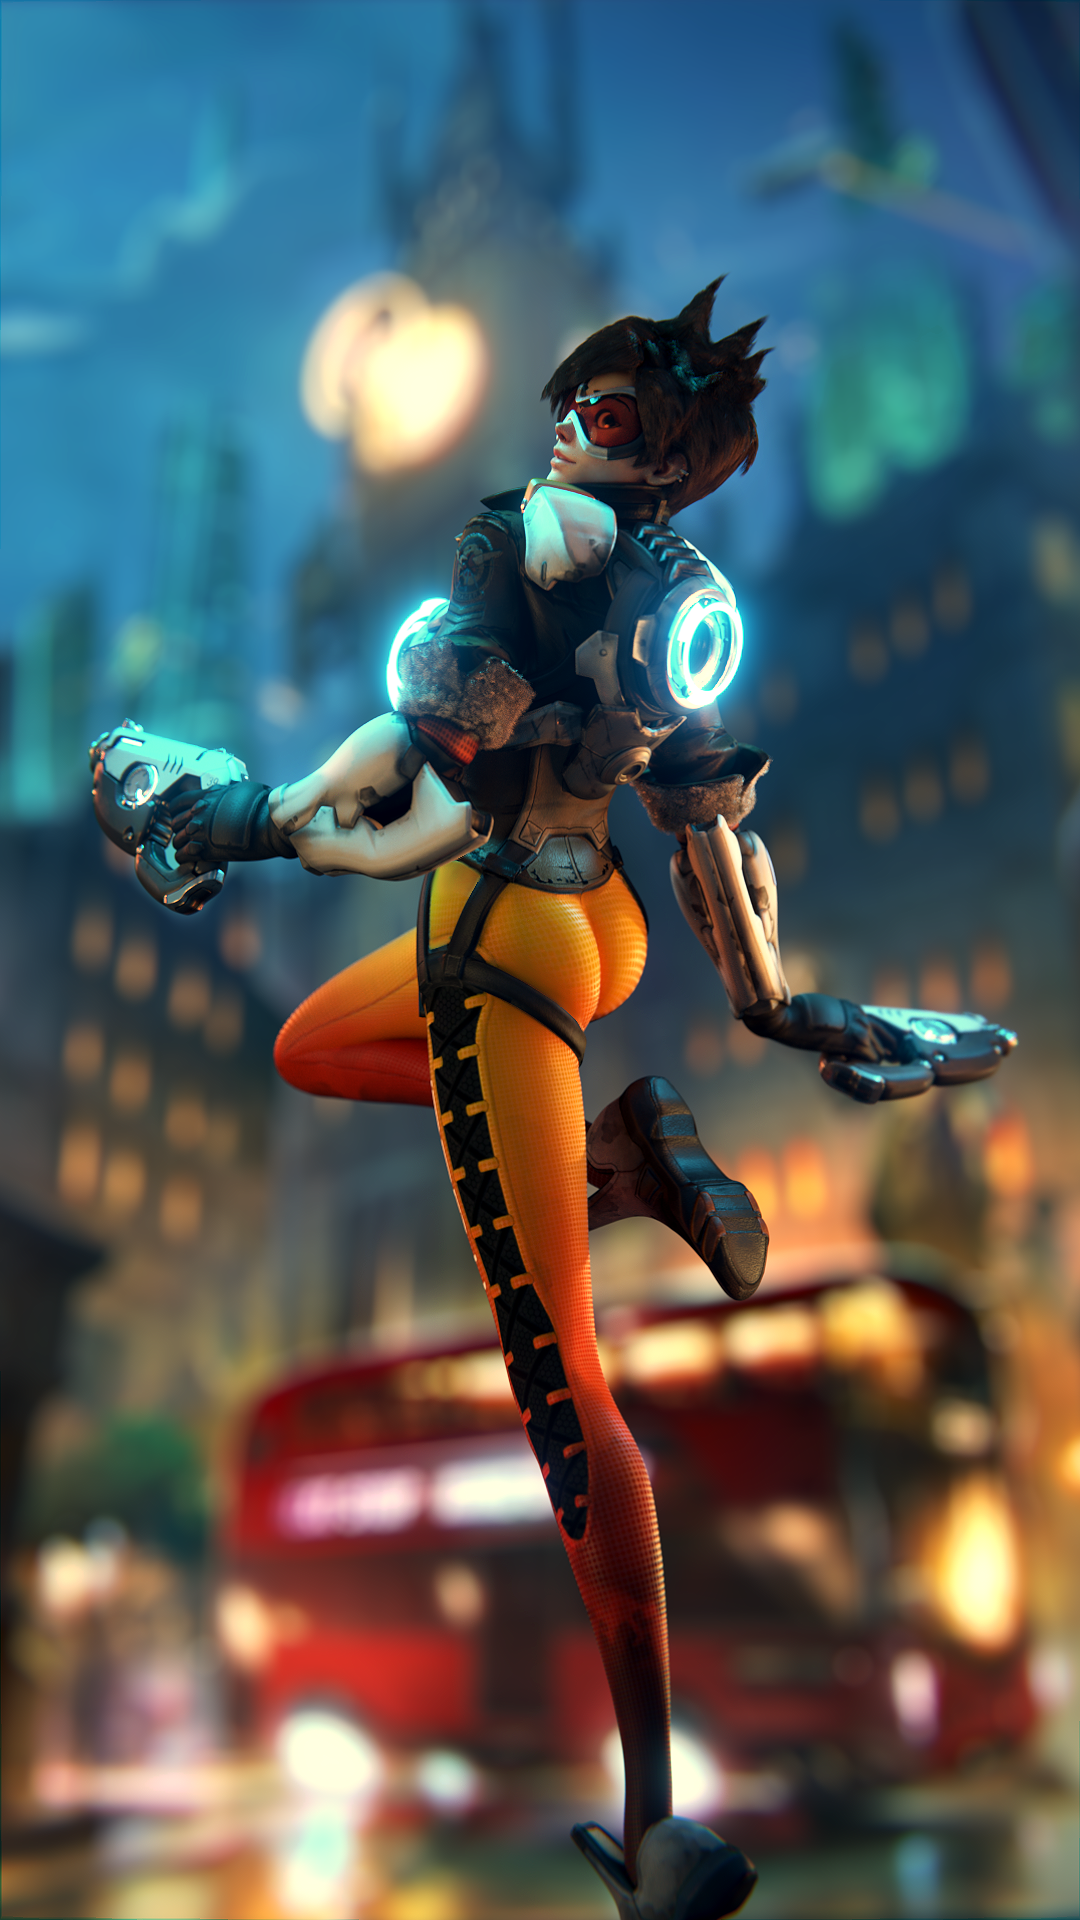 General 1080x1920 Overwatch Tracer (Overwatch) Blizzard Entertainment Blender yeero (Author) video games portrait display ass video game girls PC gaming